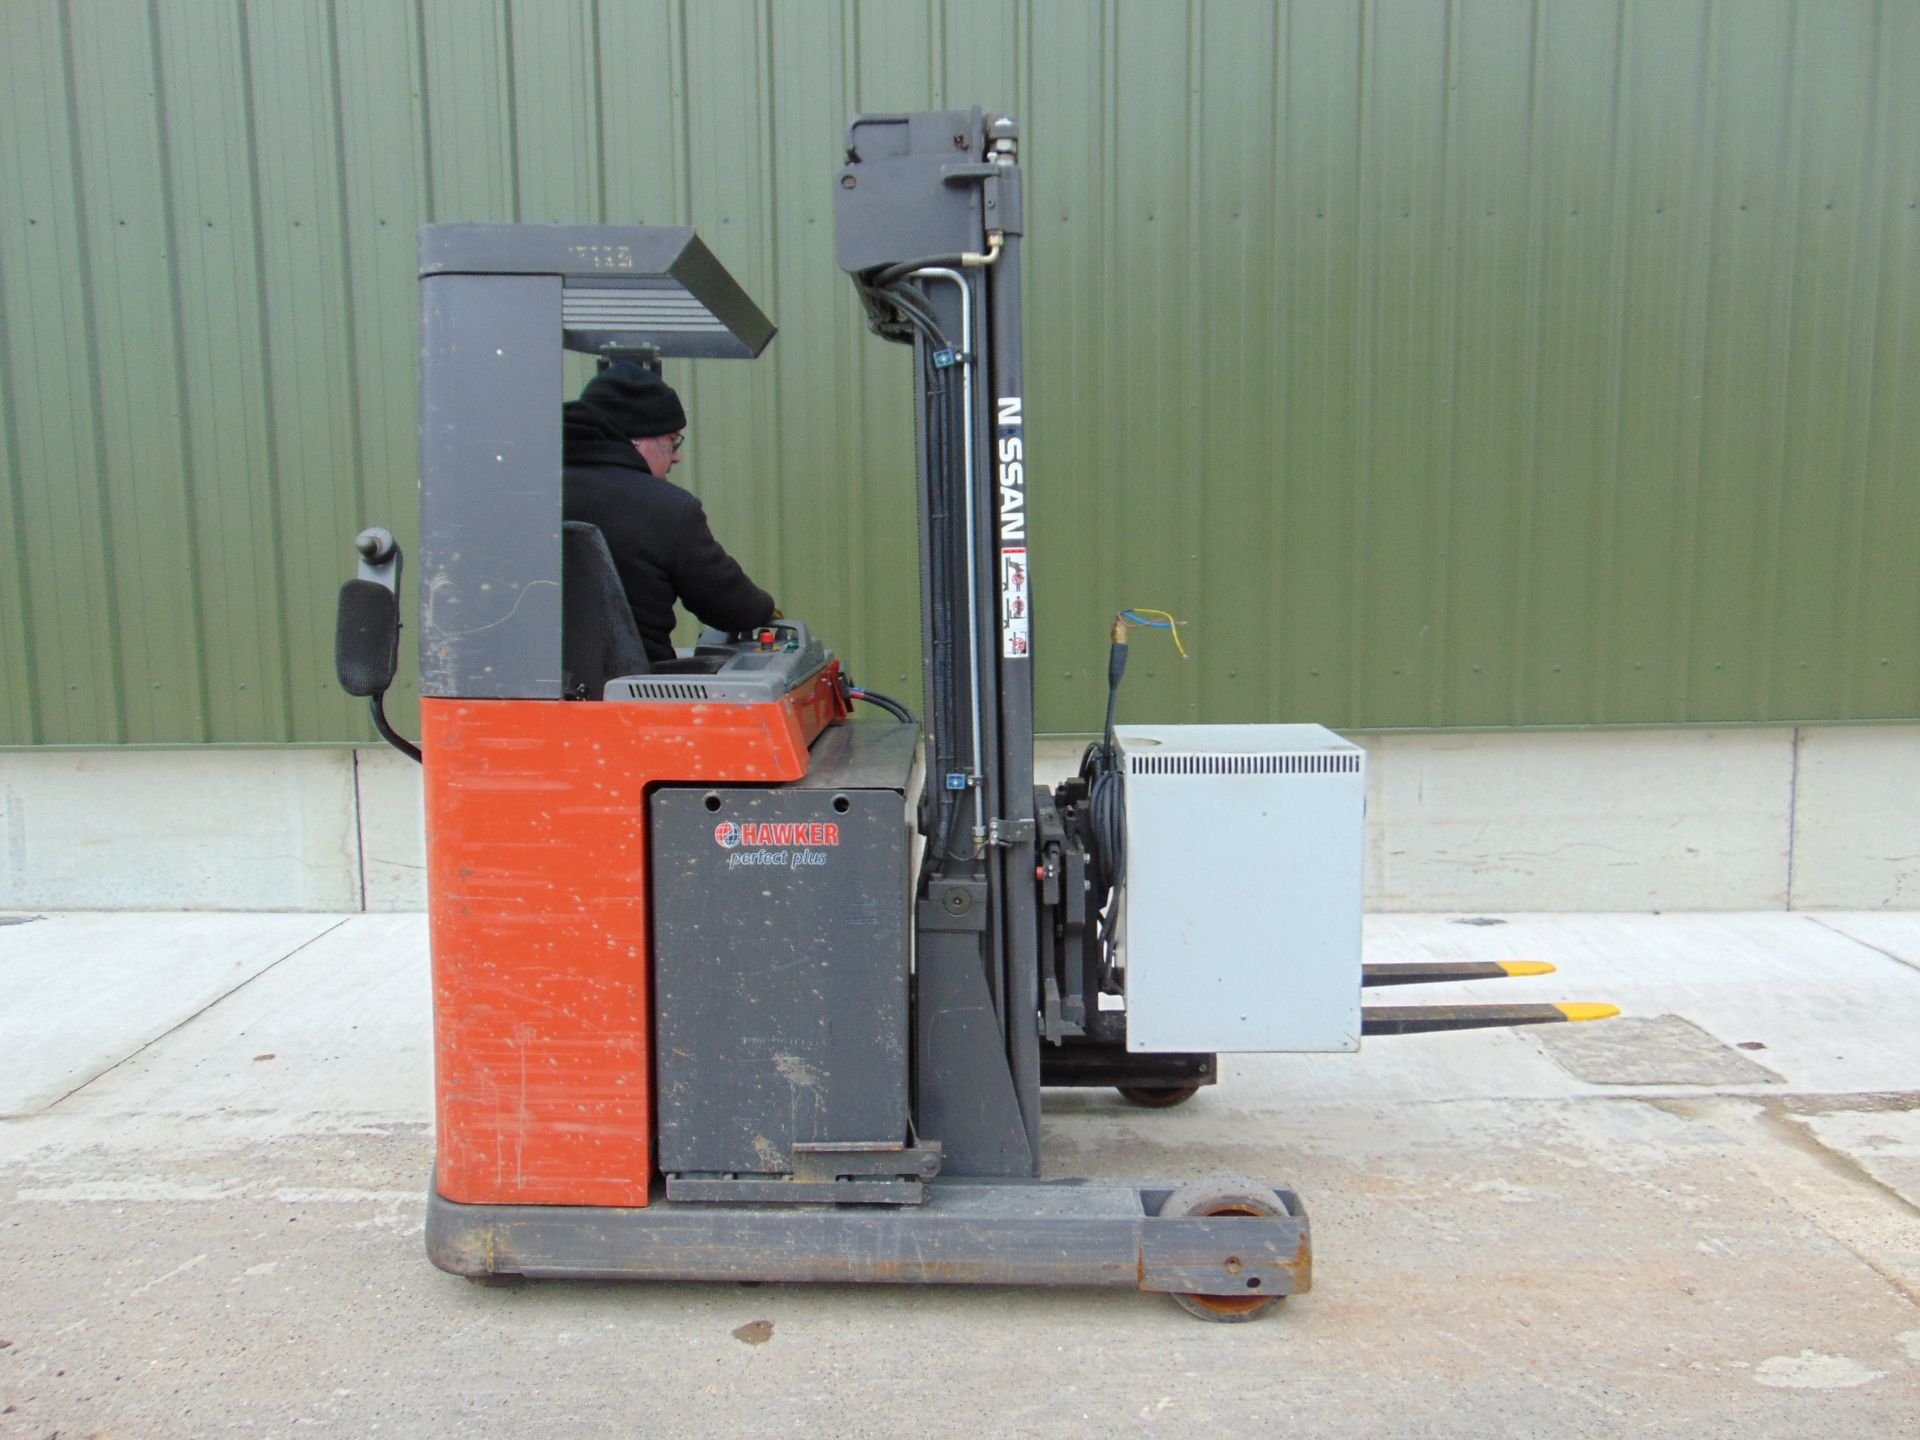 Nissan UNS-200 Electric Reach Fork Lift w/ Battery Charger Unit 2283 hrs - Image 12 of 31